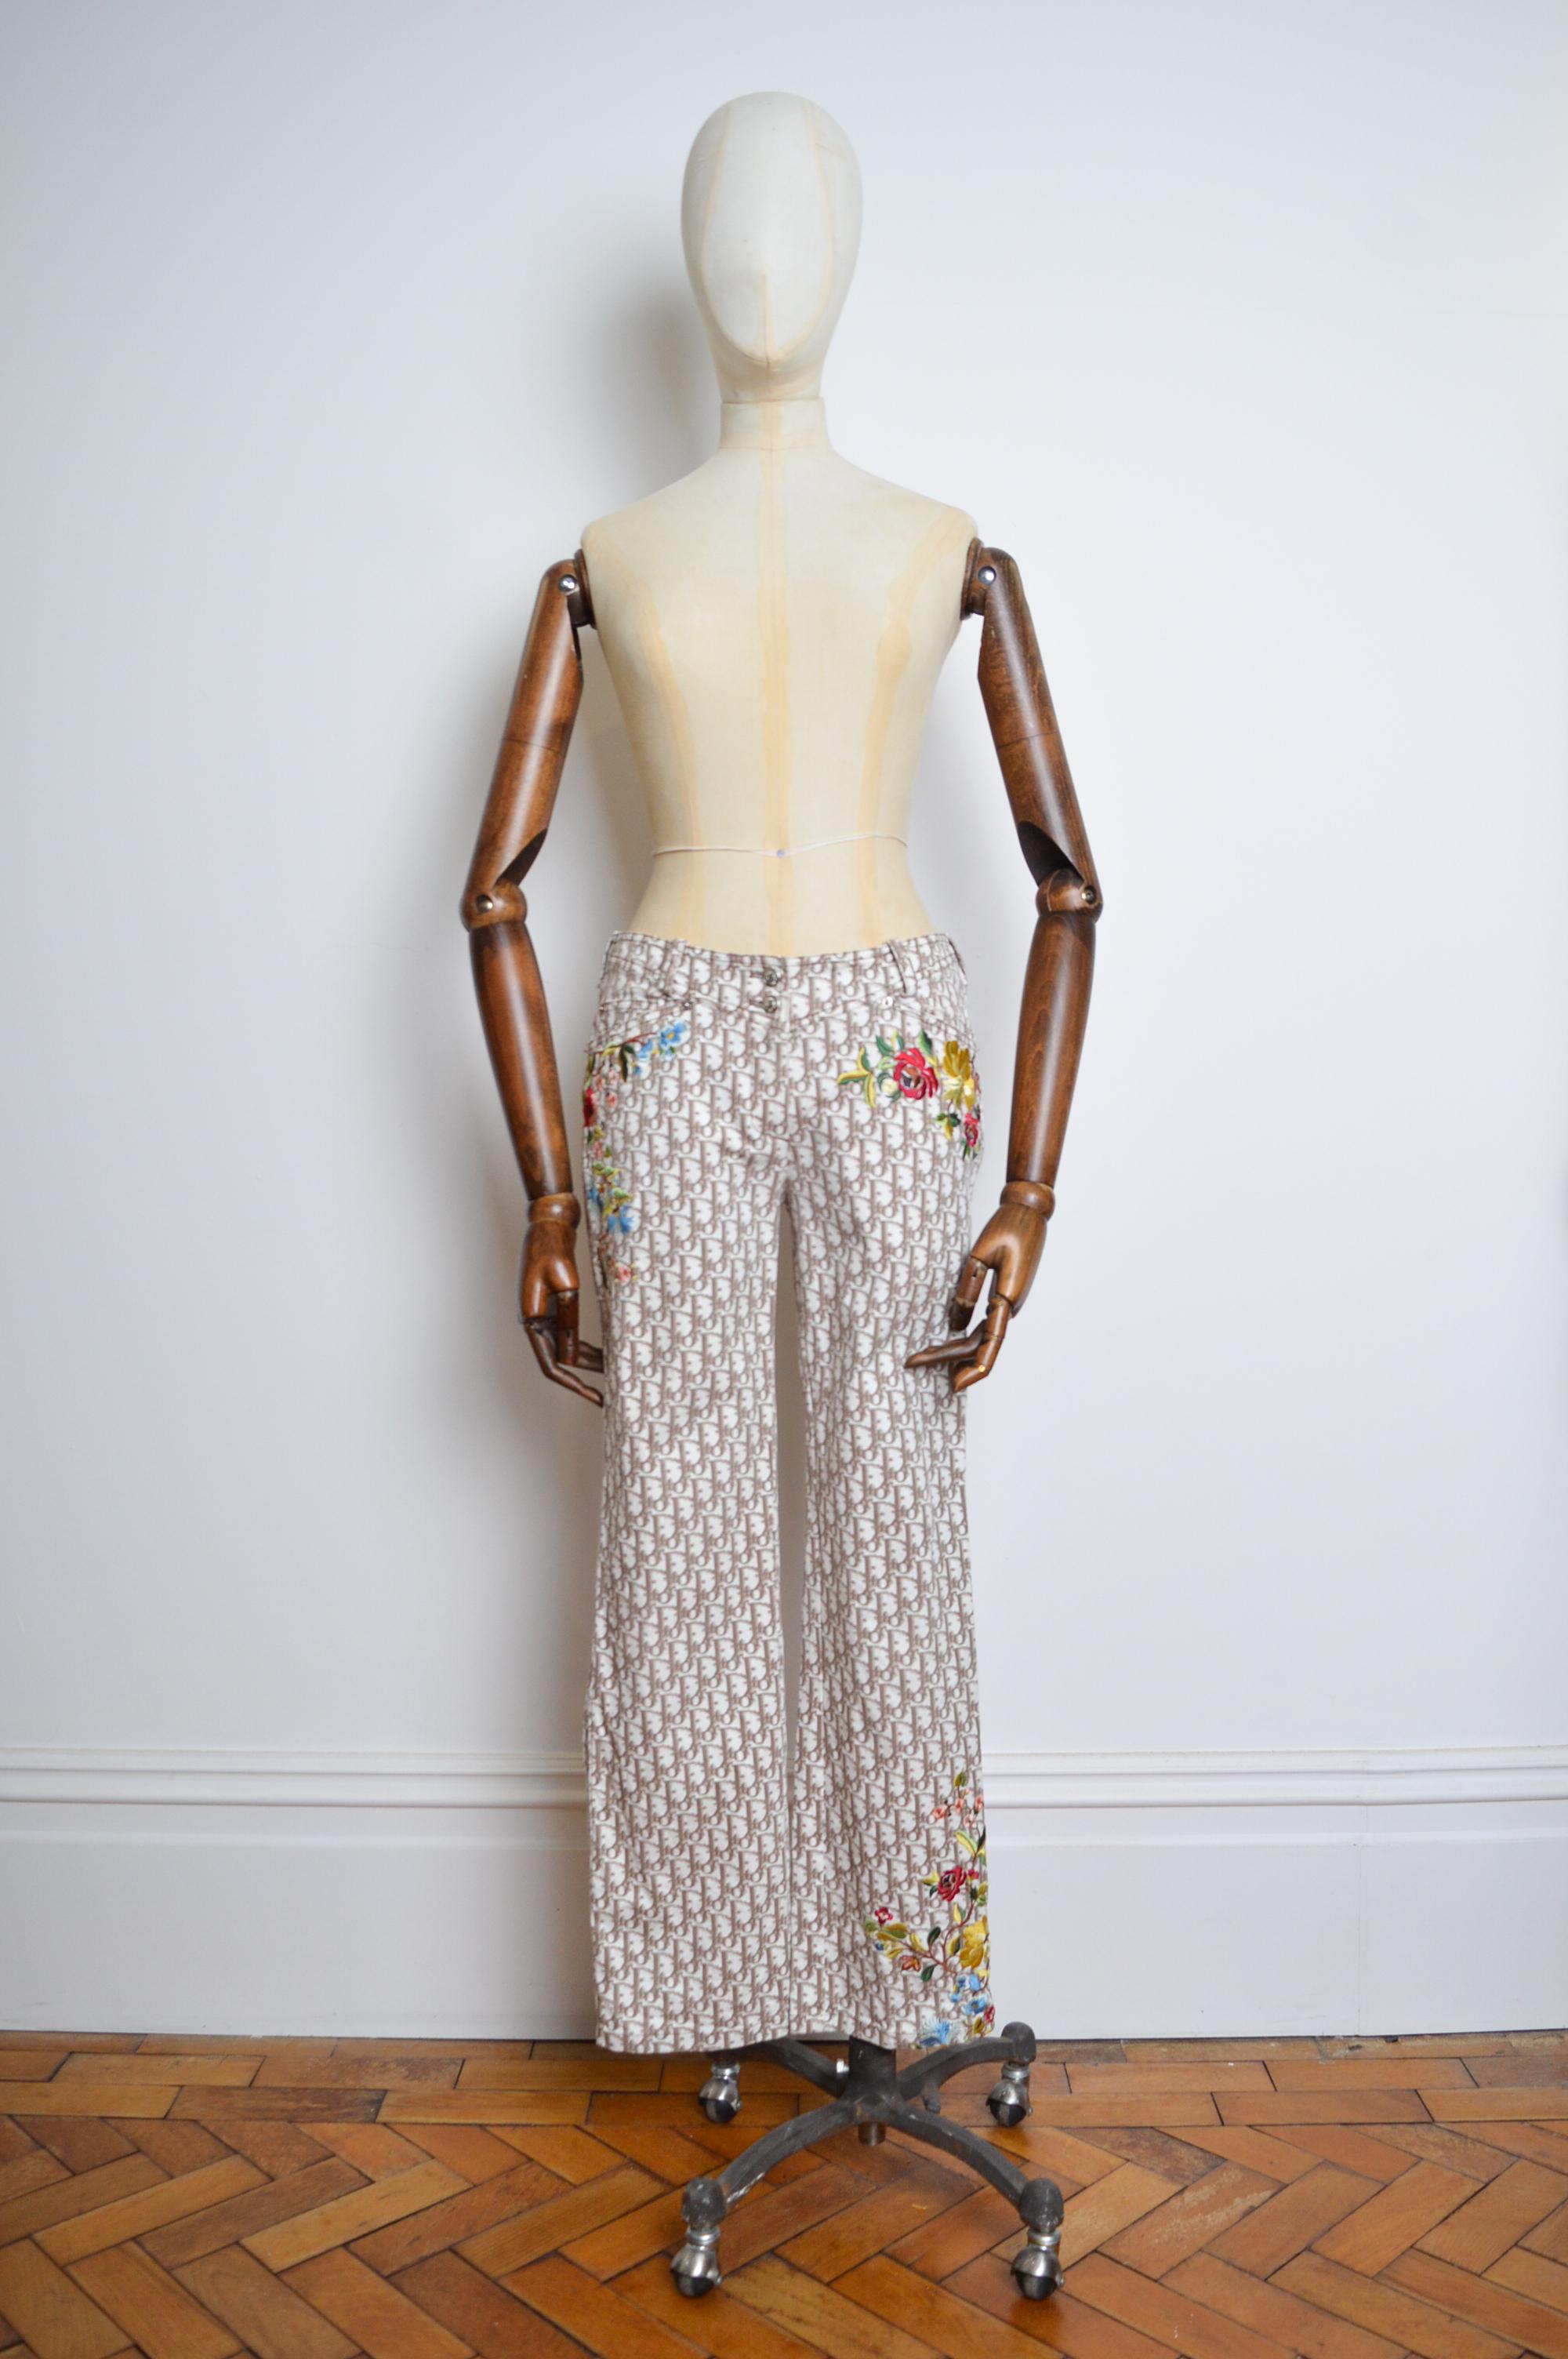 Iconic Spring / Summer 2005 Christian Dior beige 'trotter' print low waisted trousers, designed by John Galliano, with intricate floral embroidery detailing. 

MADE IN PORTUGAL.

Measurements are provided in Inches -
(Mid rise ) Waist/Hip -31